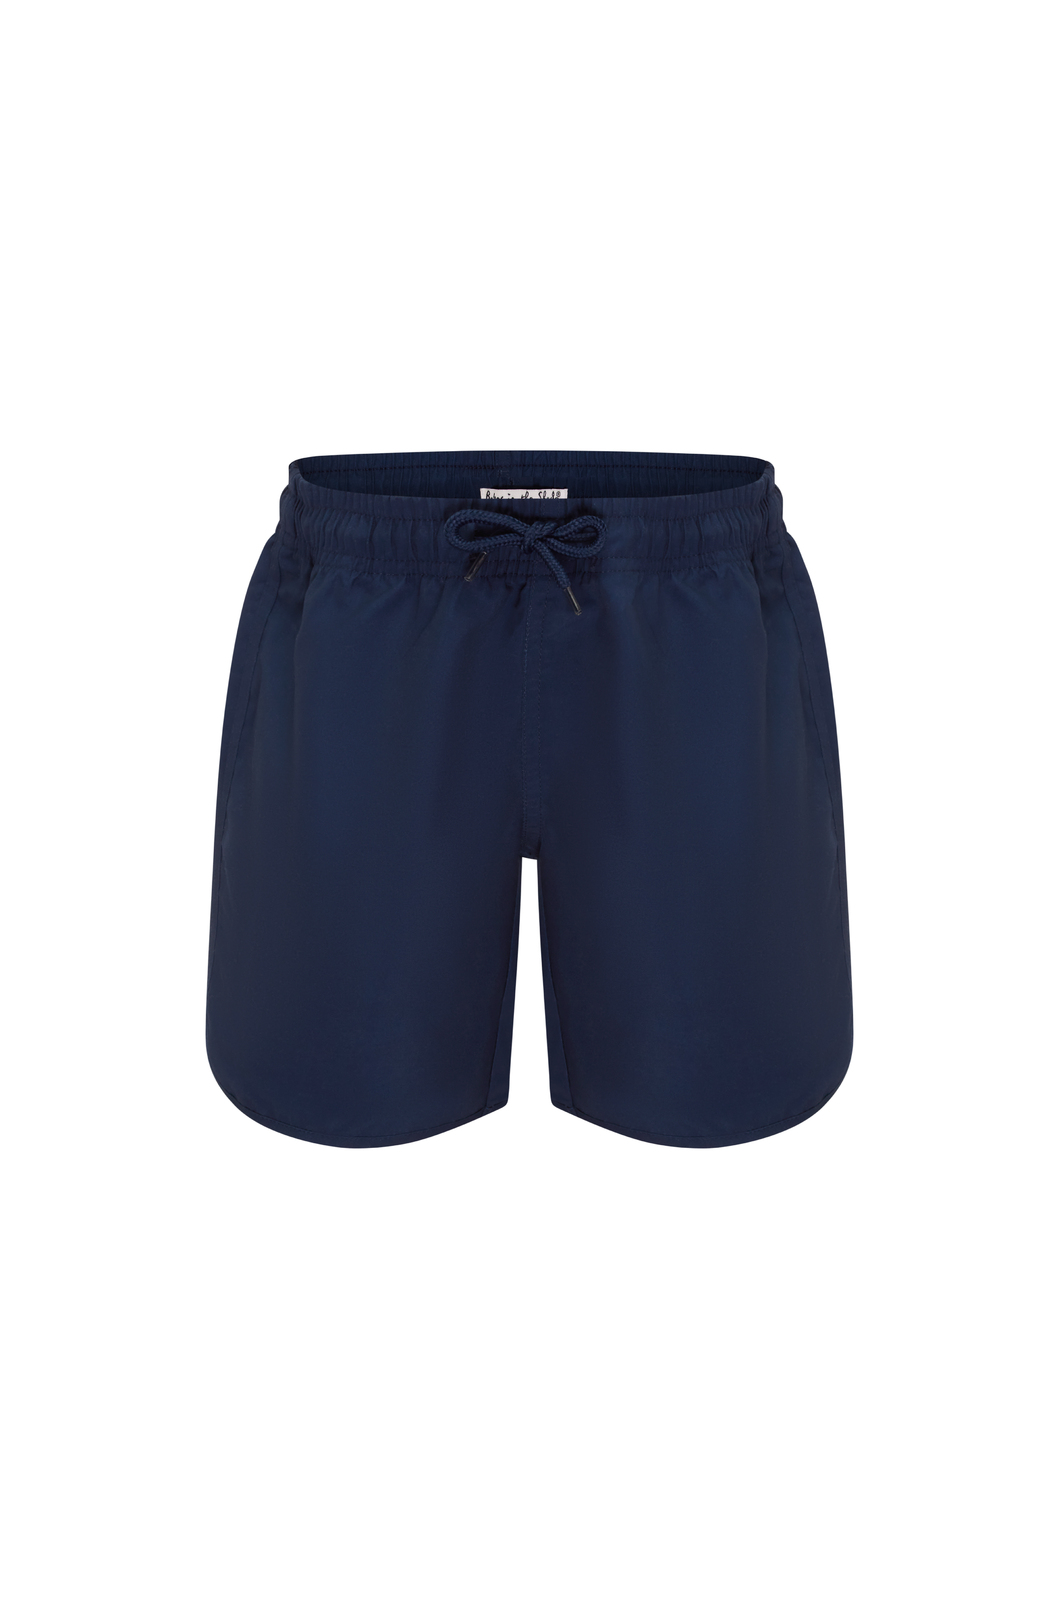 Girls Navy Boardshorts | Girls Swim Bottoms | Afterpay Available